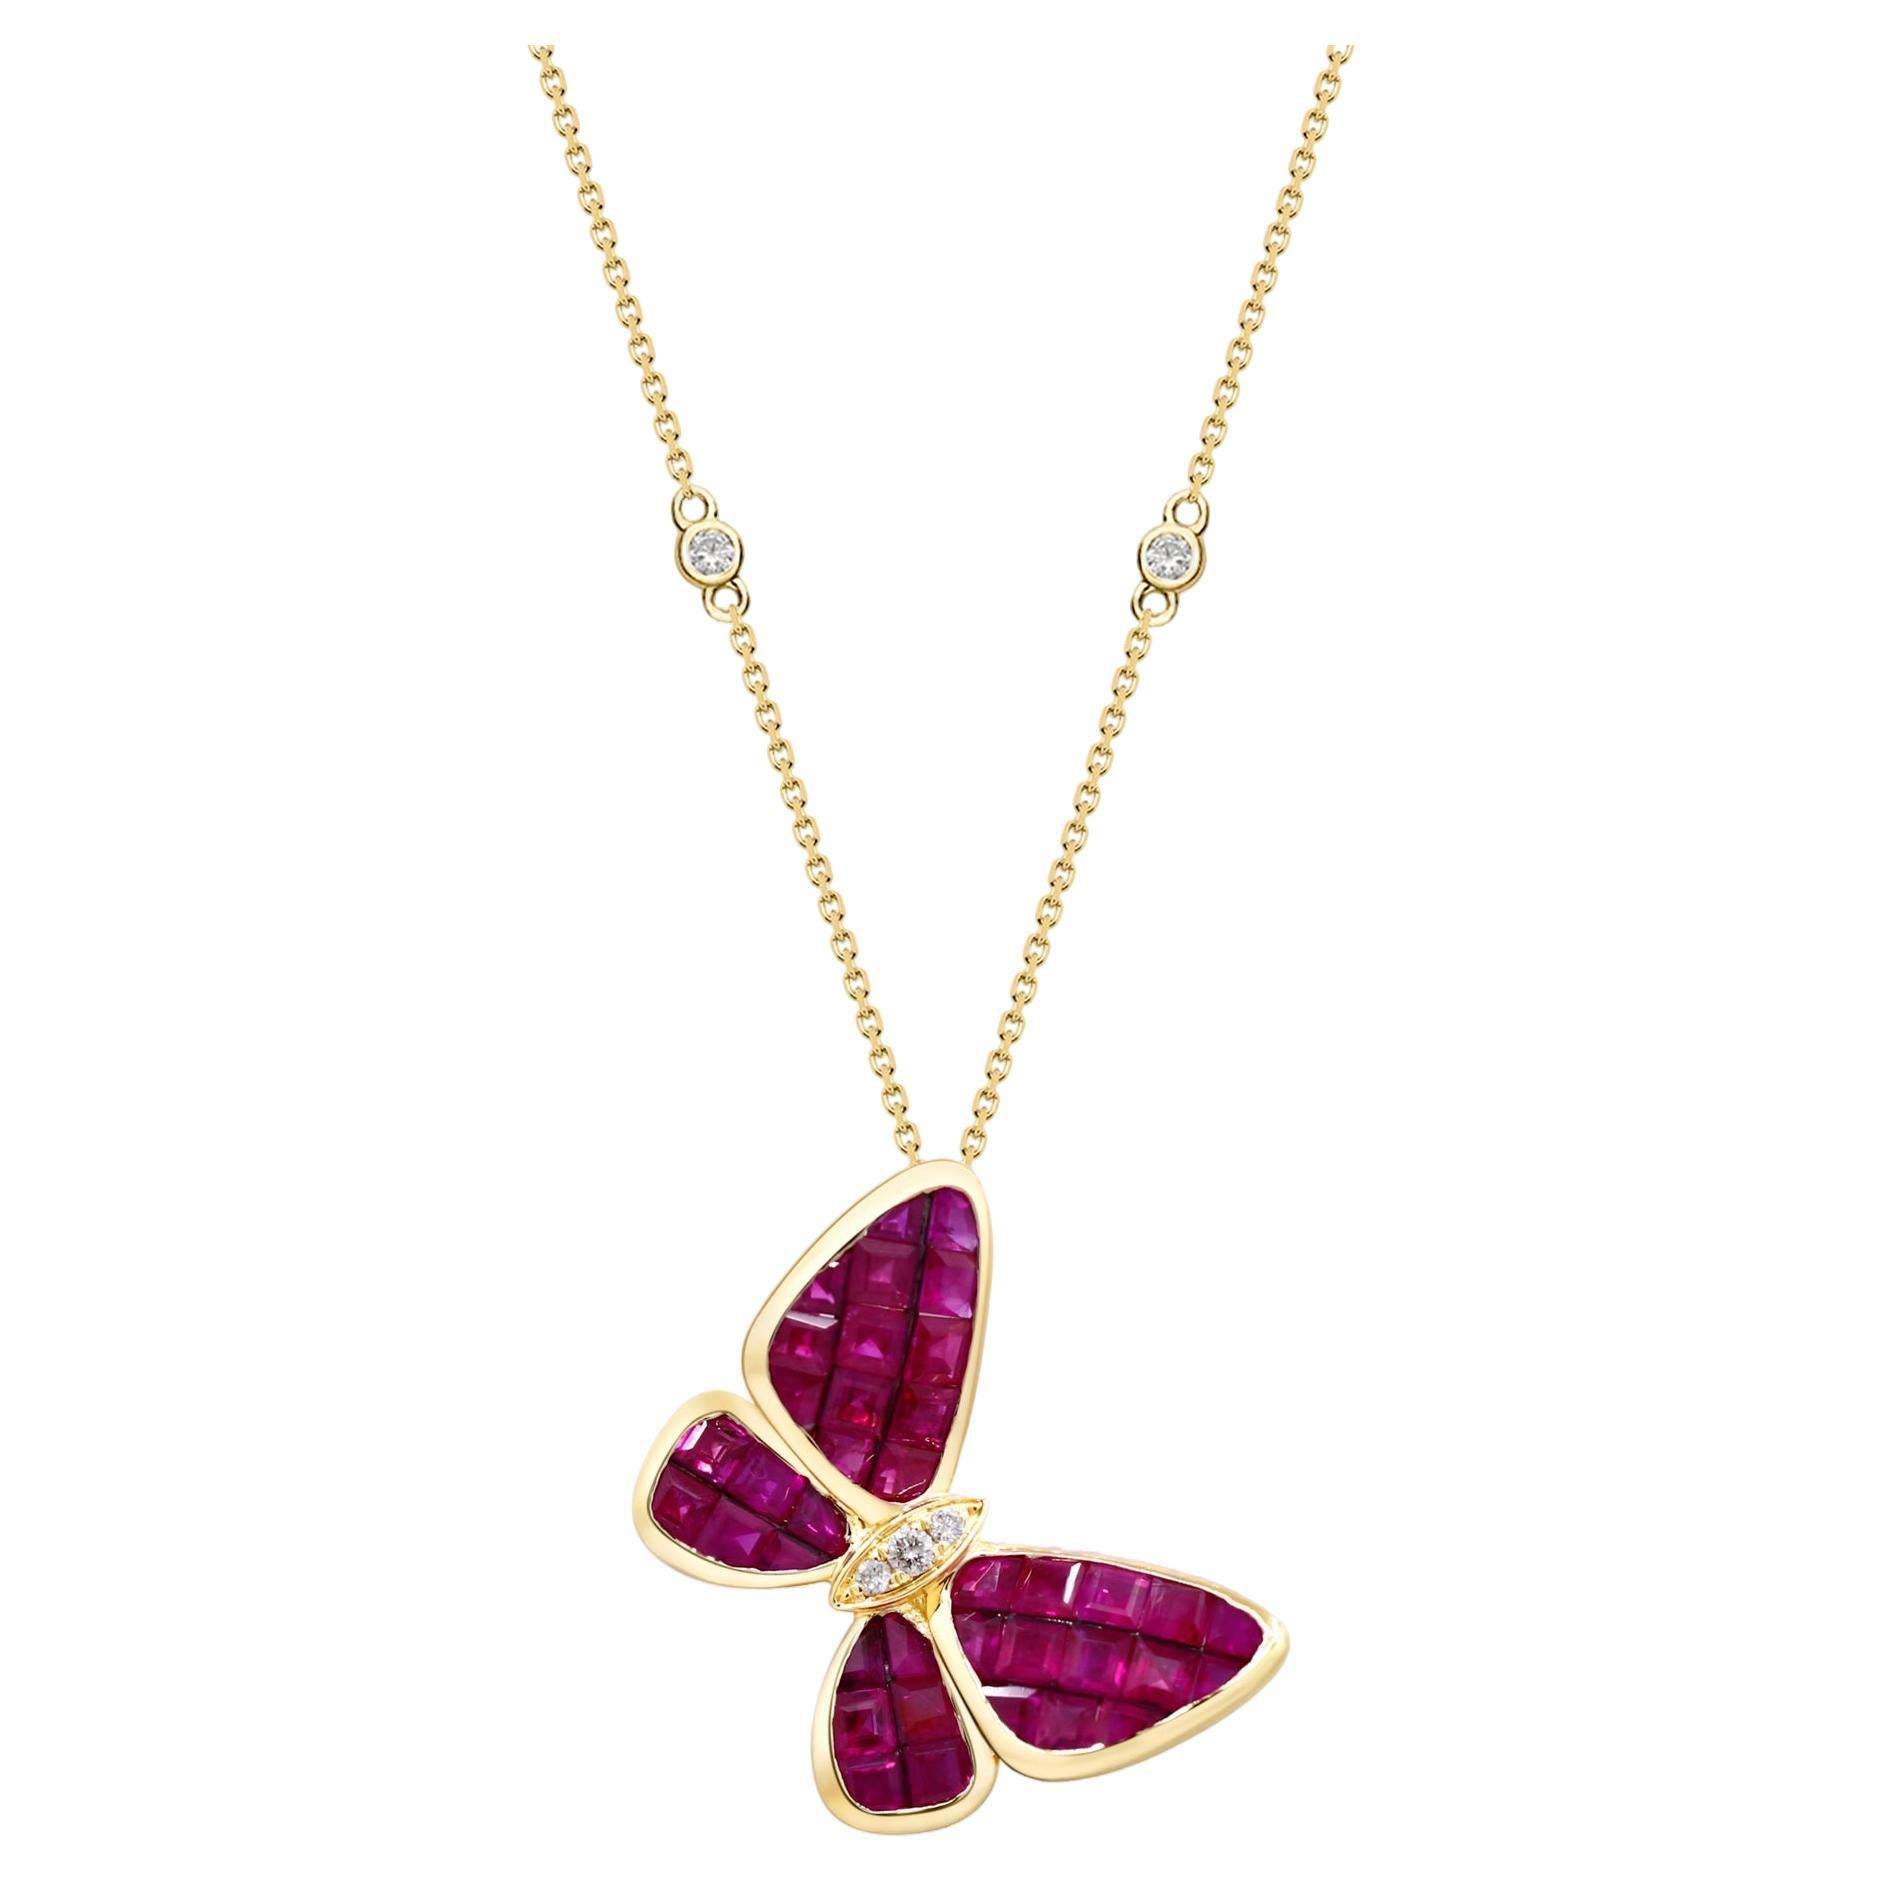 Edith 14K Yellow Gold Square-Cut Ruby Pendant For Sale